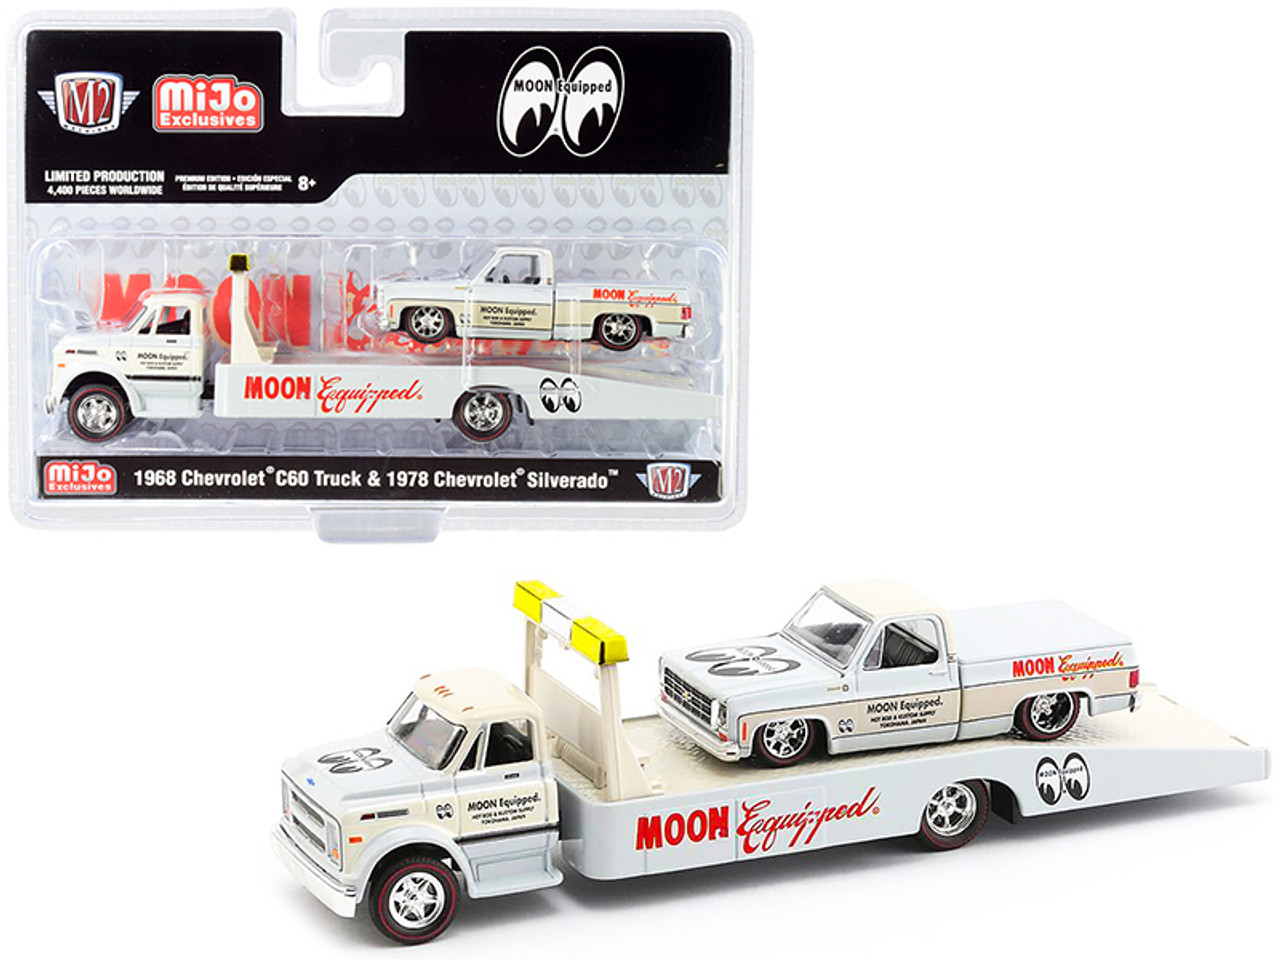 1968 Chevrolet C60 Ramp Truck and 1978 Chevrolet Silverado Pickup Truck with Bed Cover "Mooneyes Equipped" White and Cream Limited Edition to 4400 pieces Worldwide 1/64 Diecast Models by M2 Machines